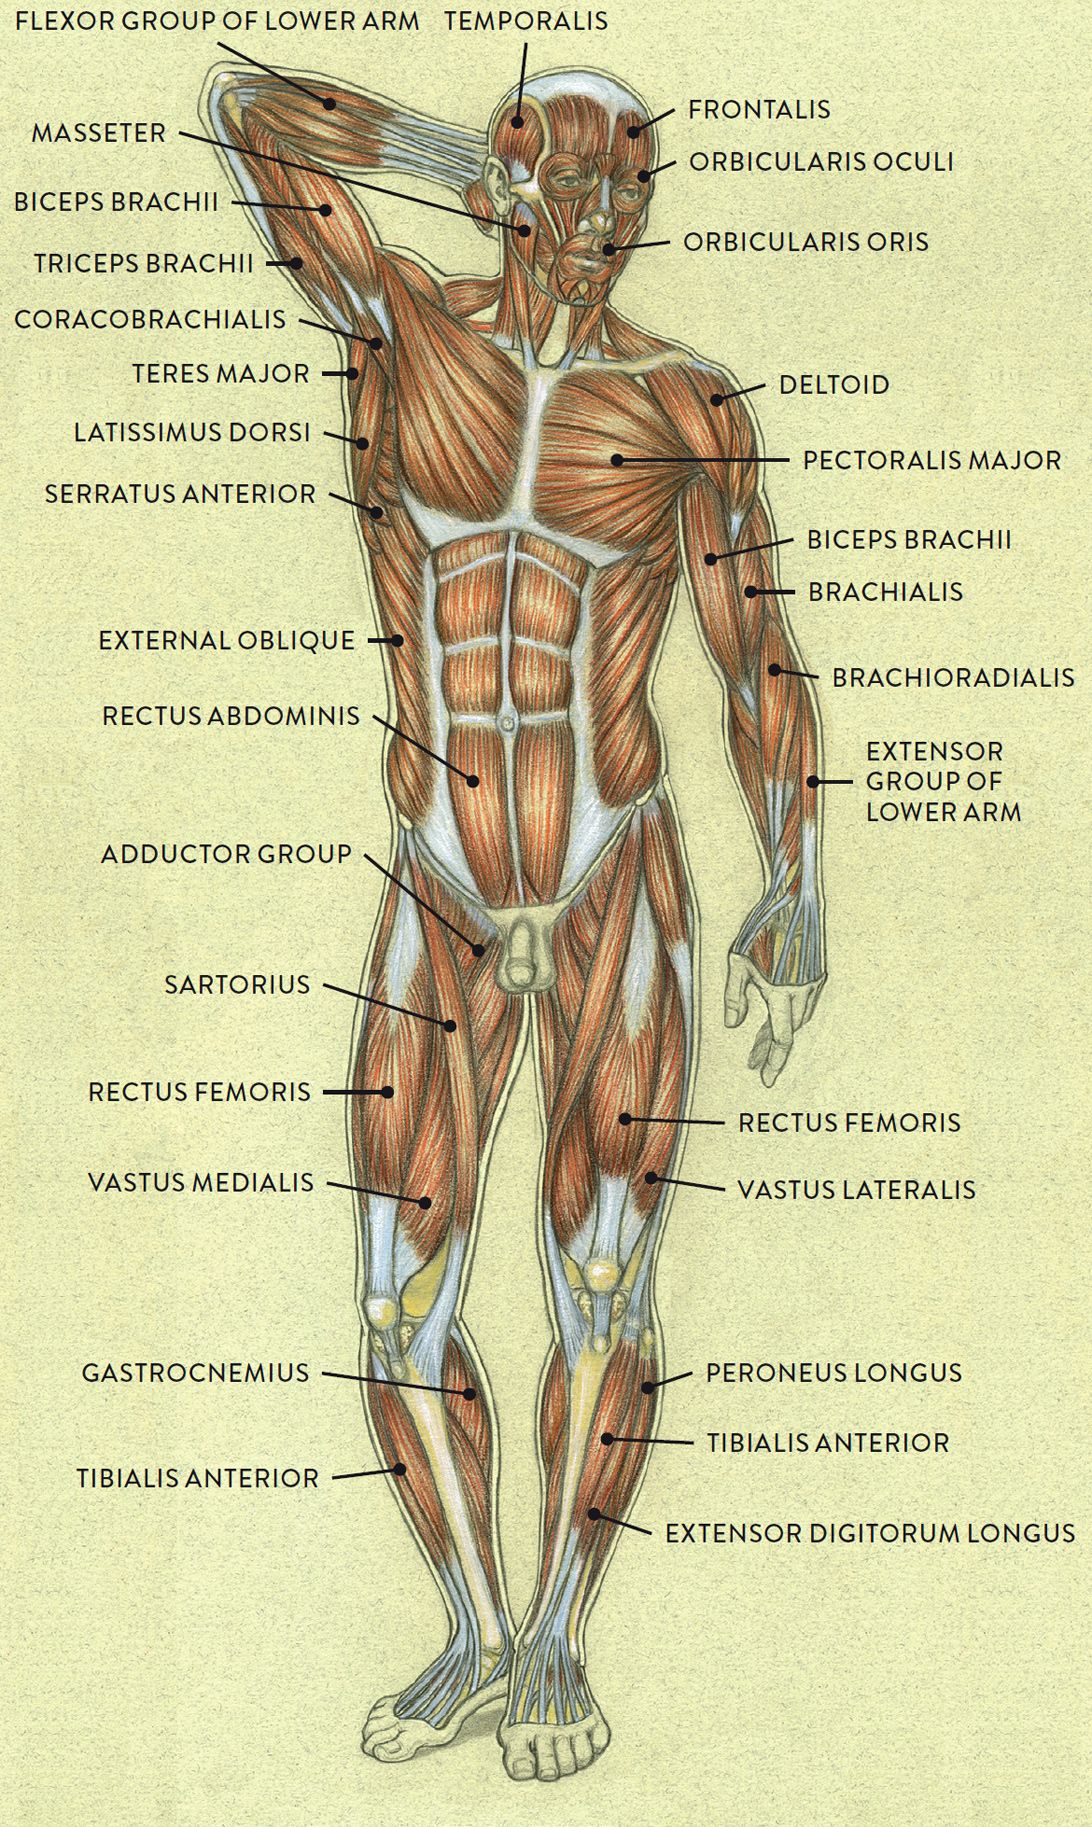 MUSCLES OF THE MALE FIGURE—POSTERIOR VIEW